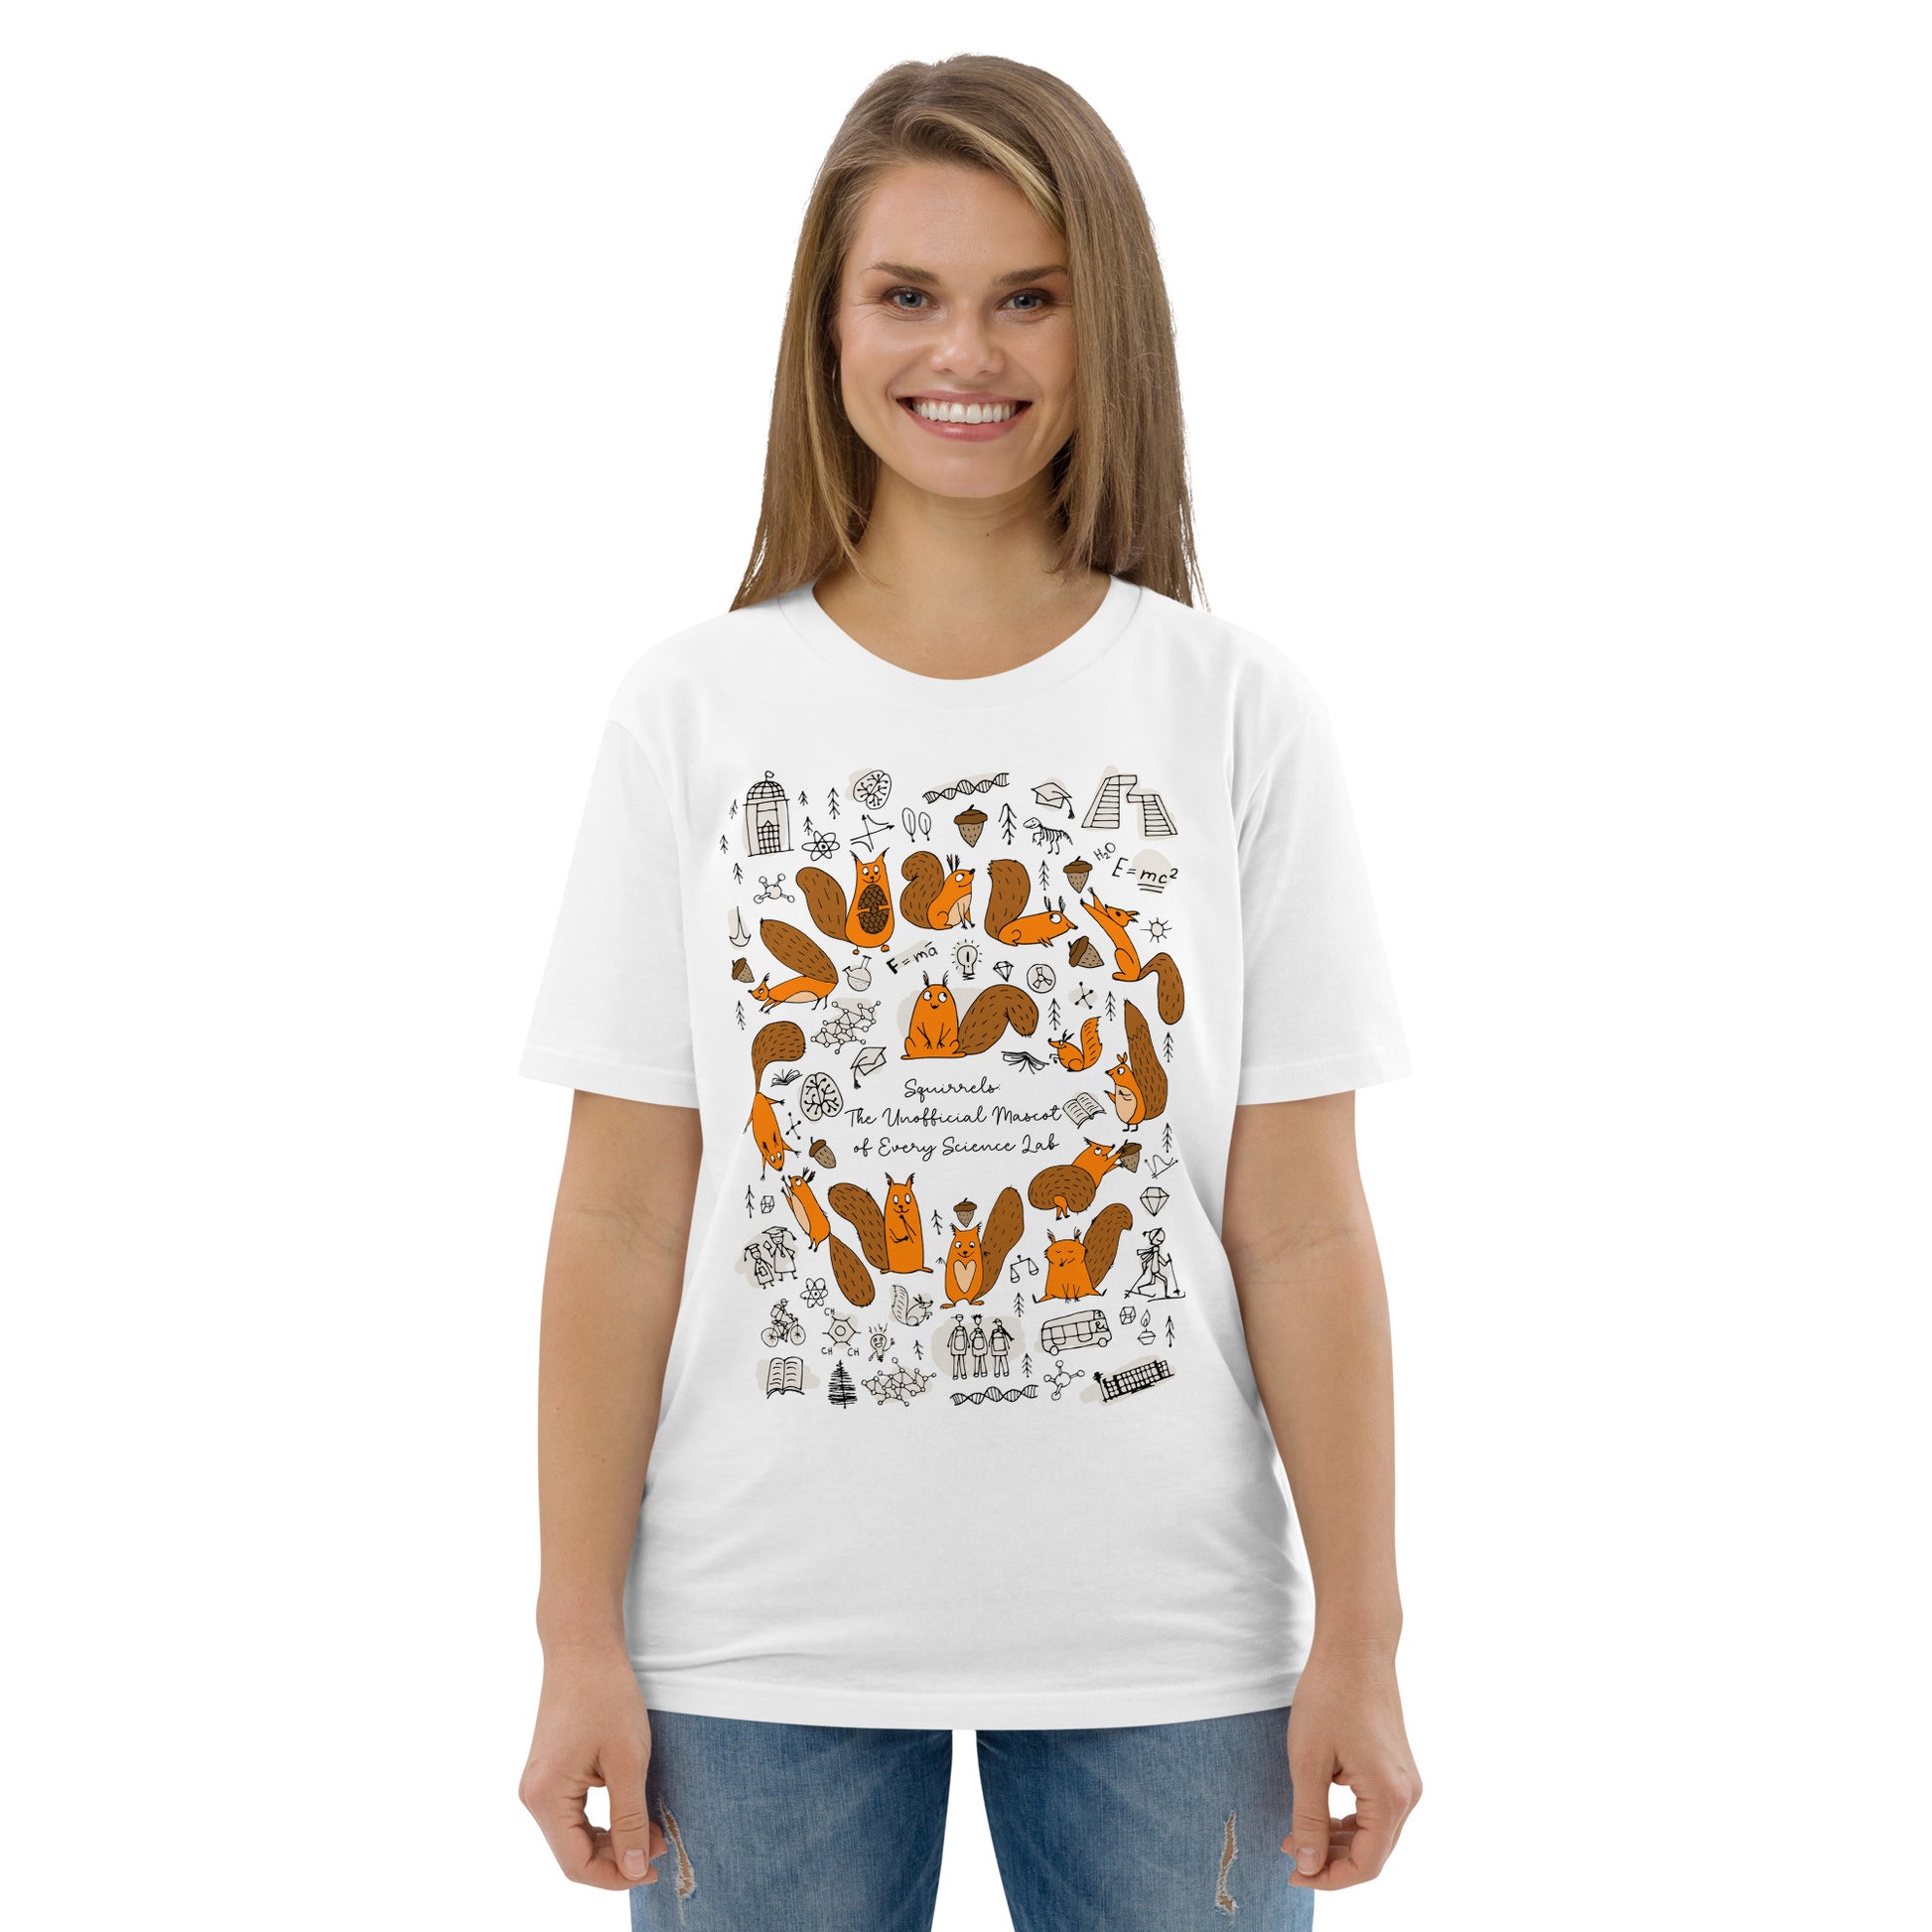 Smiling Woman in Unisex organic Cotton t-shirt with funny Squirrels and science design elements. Personalised t-shirt. Basic text on t-shirt "Squirrels the unofficial mascot of every lab"